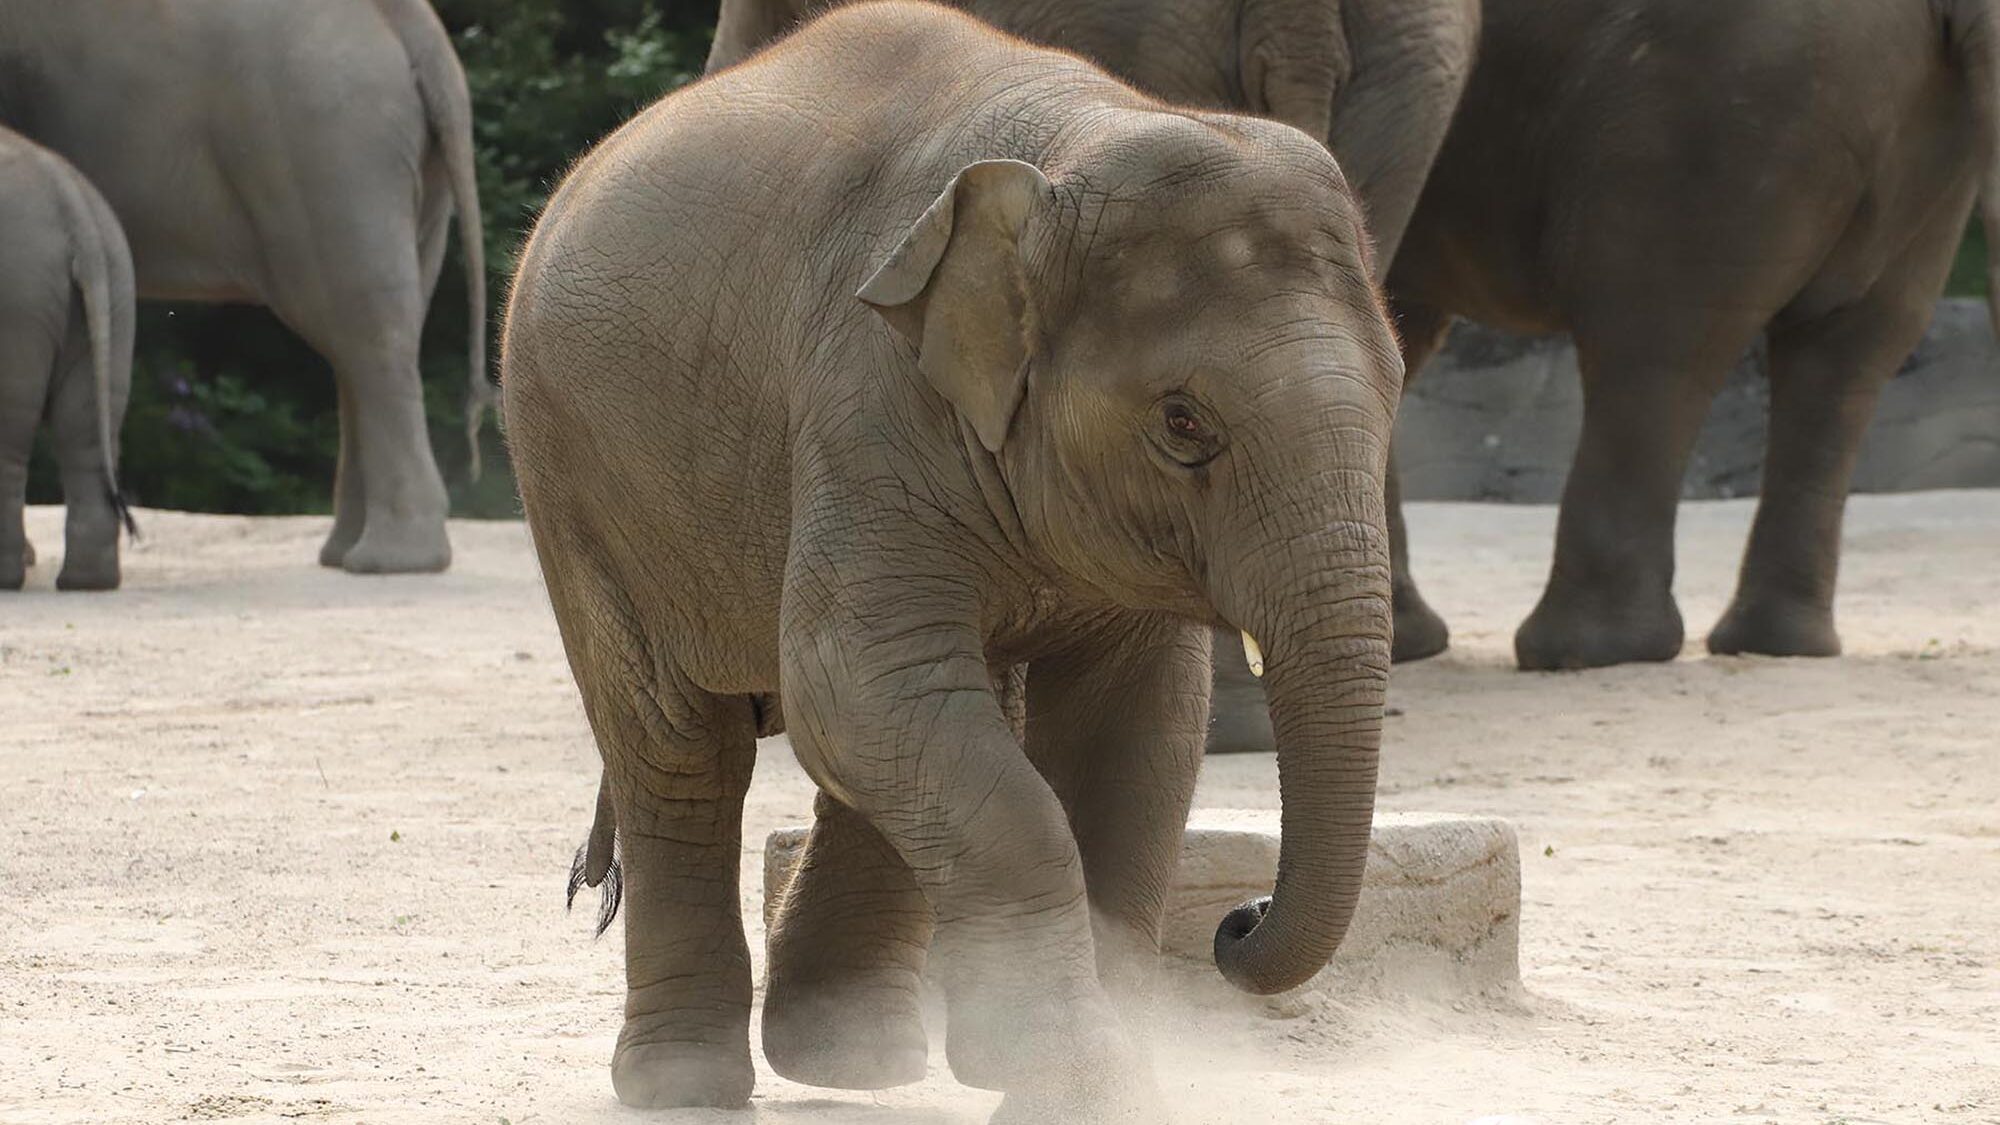 Yashoda, a 42-year-old football-loving elephant at the Hagenbeck Zoo in Germany. (Hagenbeck Zoo/GZenger News)